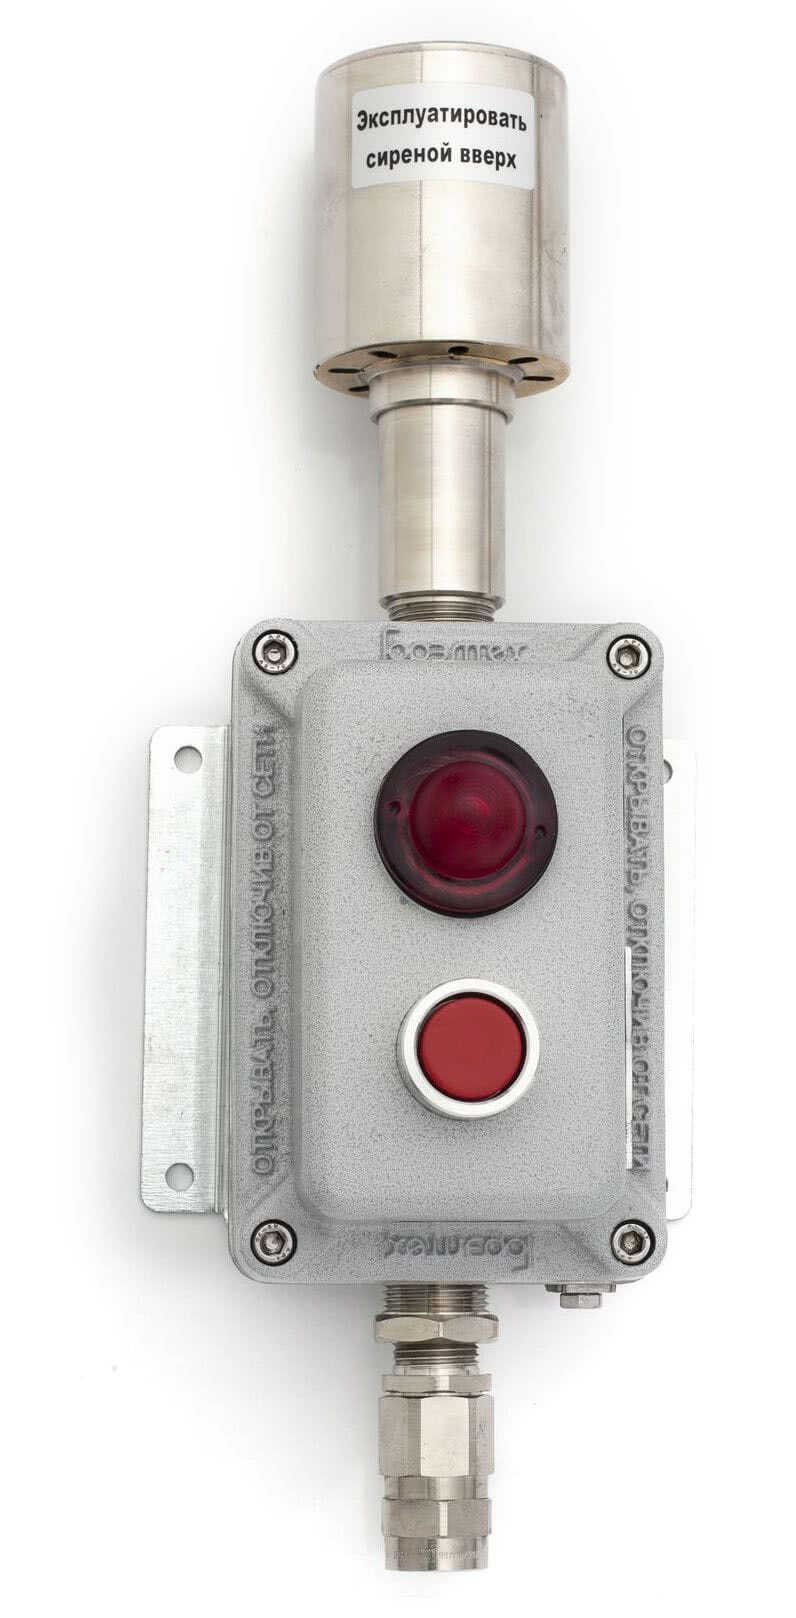 Explosion-proof light and sound signaling device PGSK02 (CSE-ALARM-122)